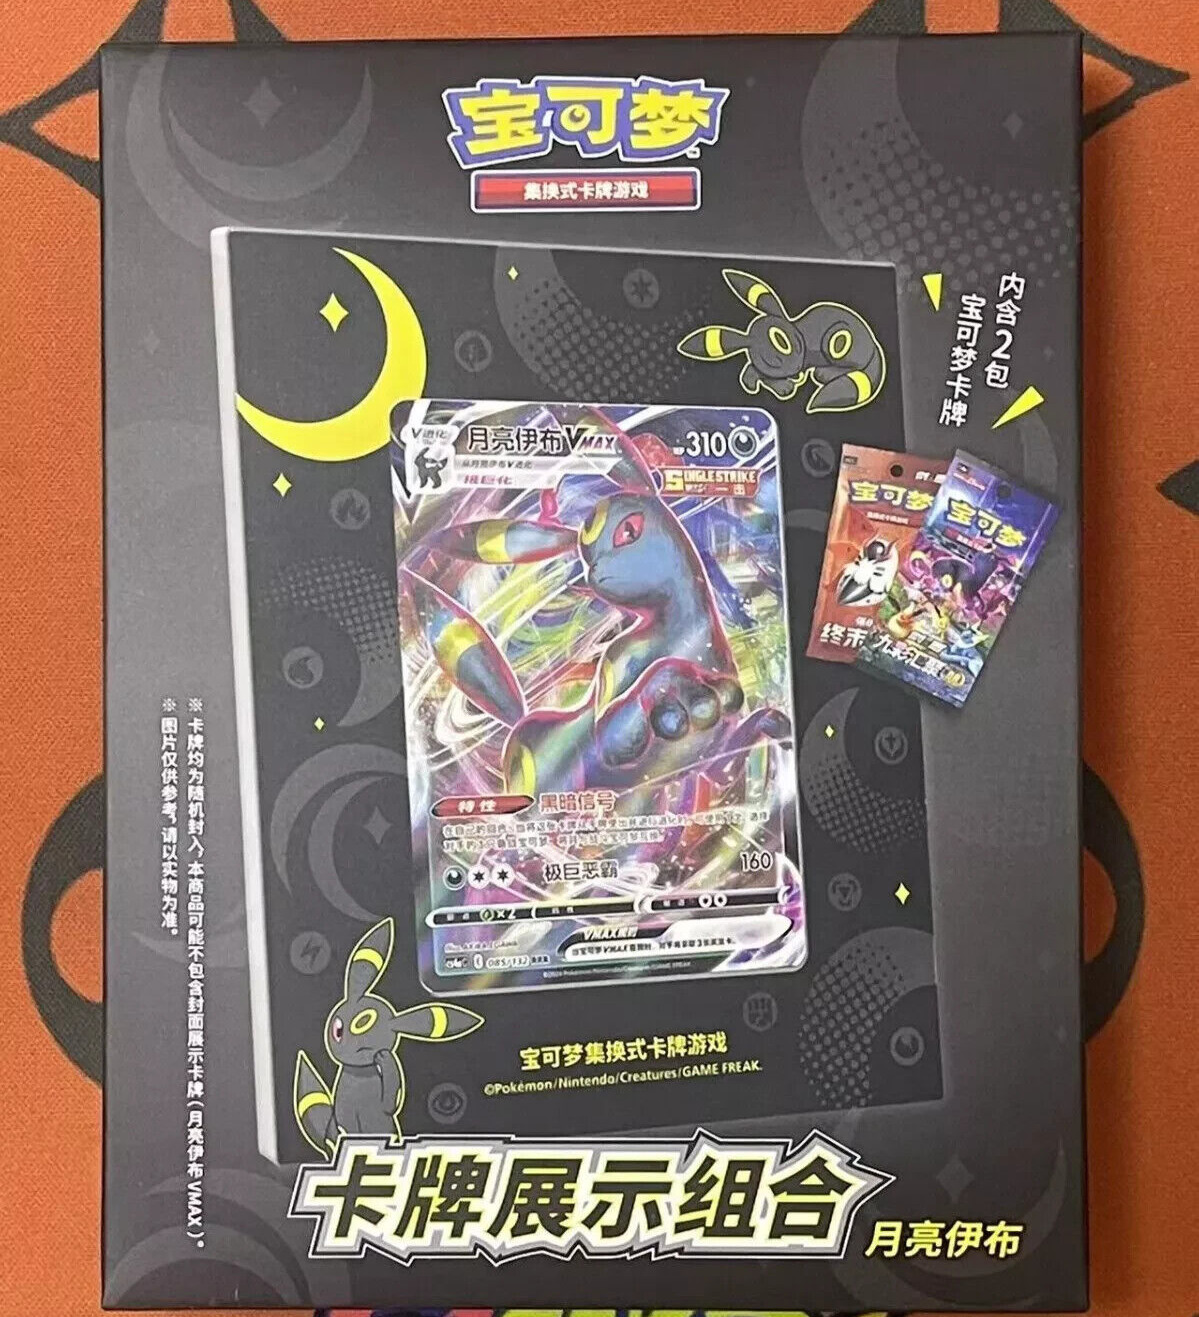 Pokemon TCG S-Chinese Umbreon Exhibition Frame Box Sealed New Released